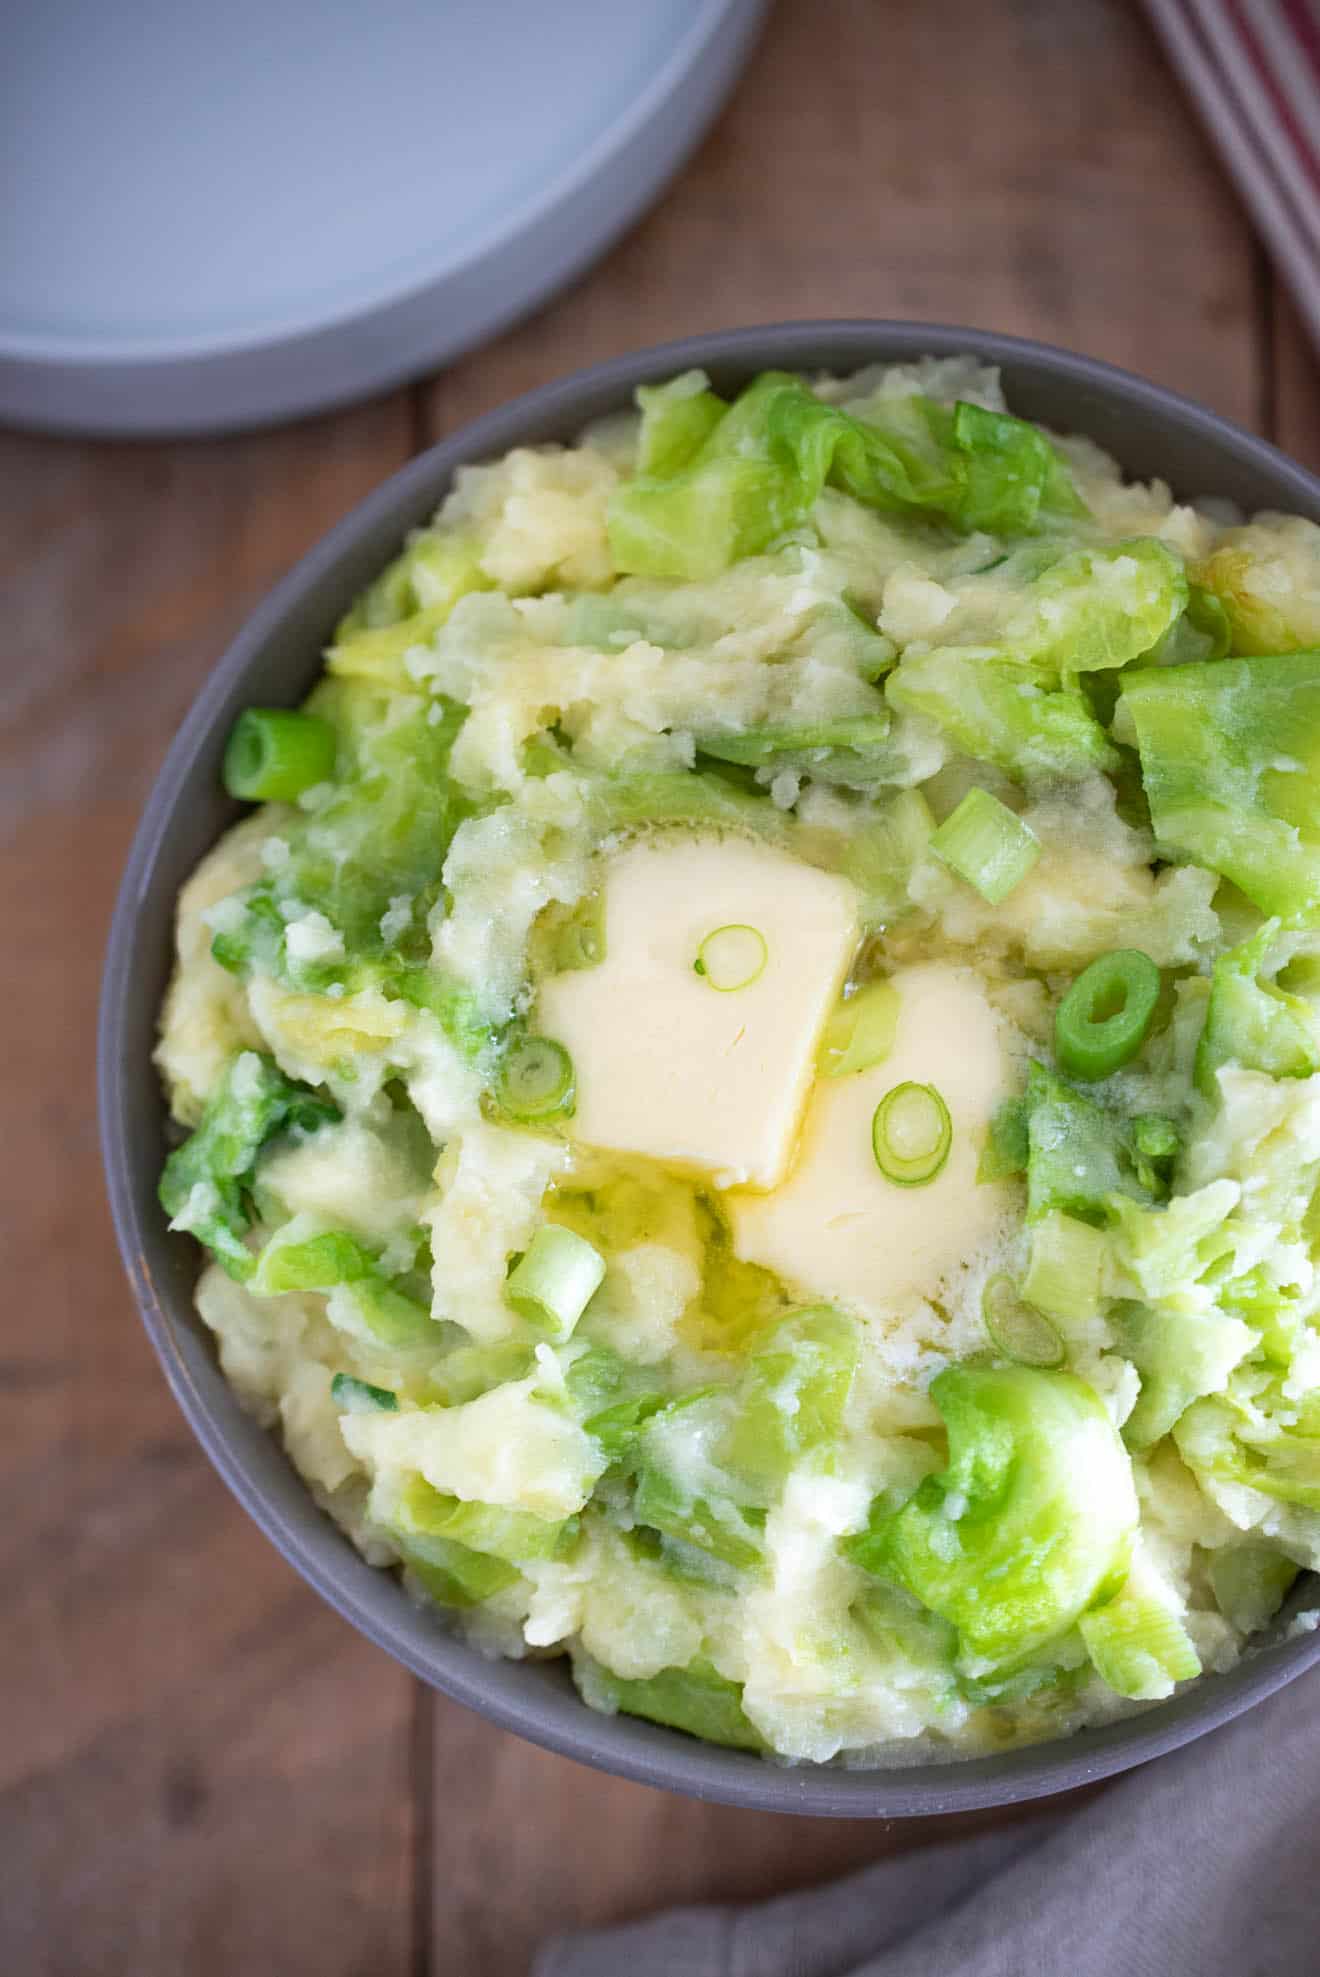 A closeup of the colcannon showing the melting butter, cabbage and spring onion